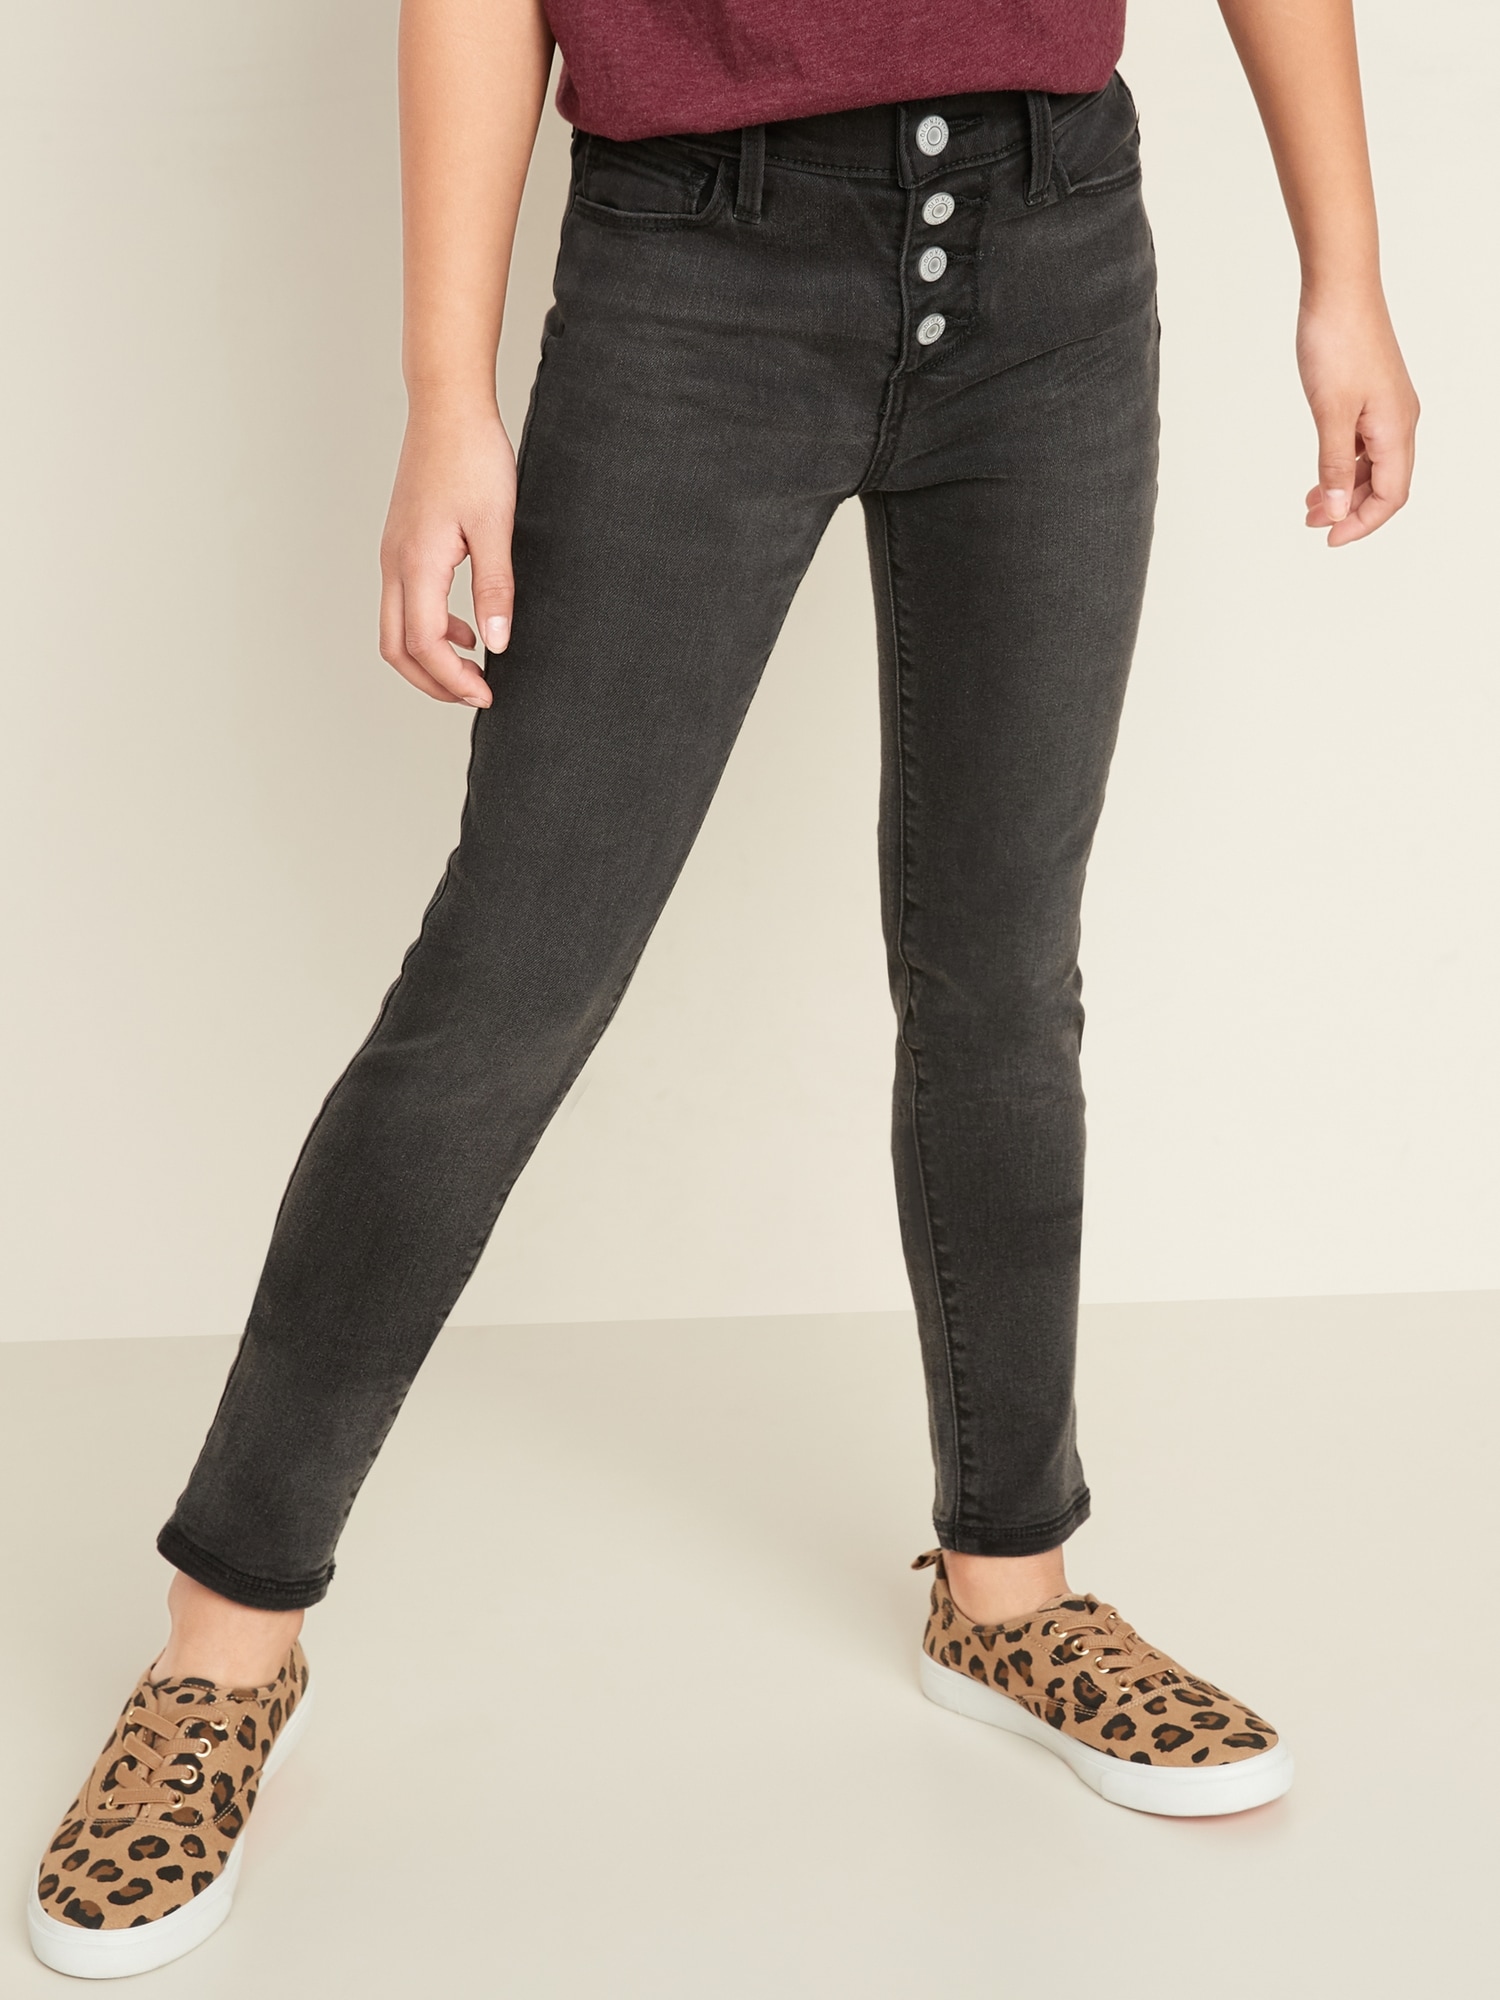 High Waisted Built In Tough Rockstar Super Skinny Button Fly Black Jeggings For Girls Old Navy